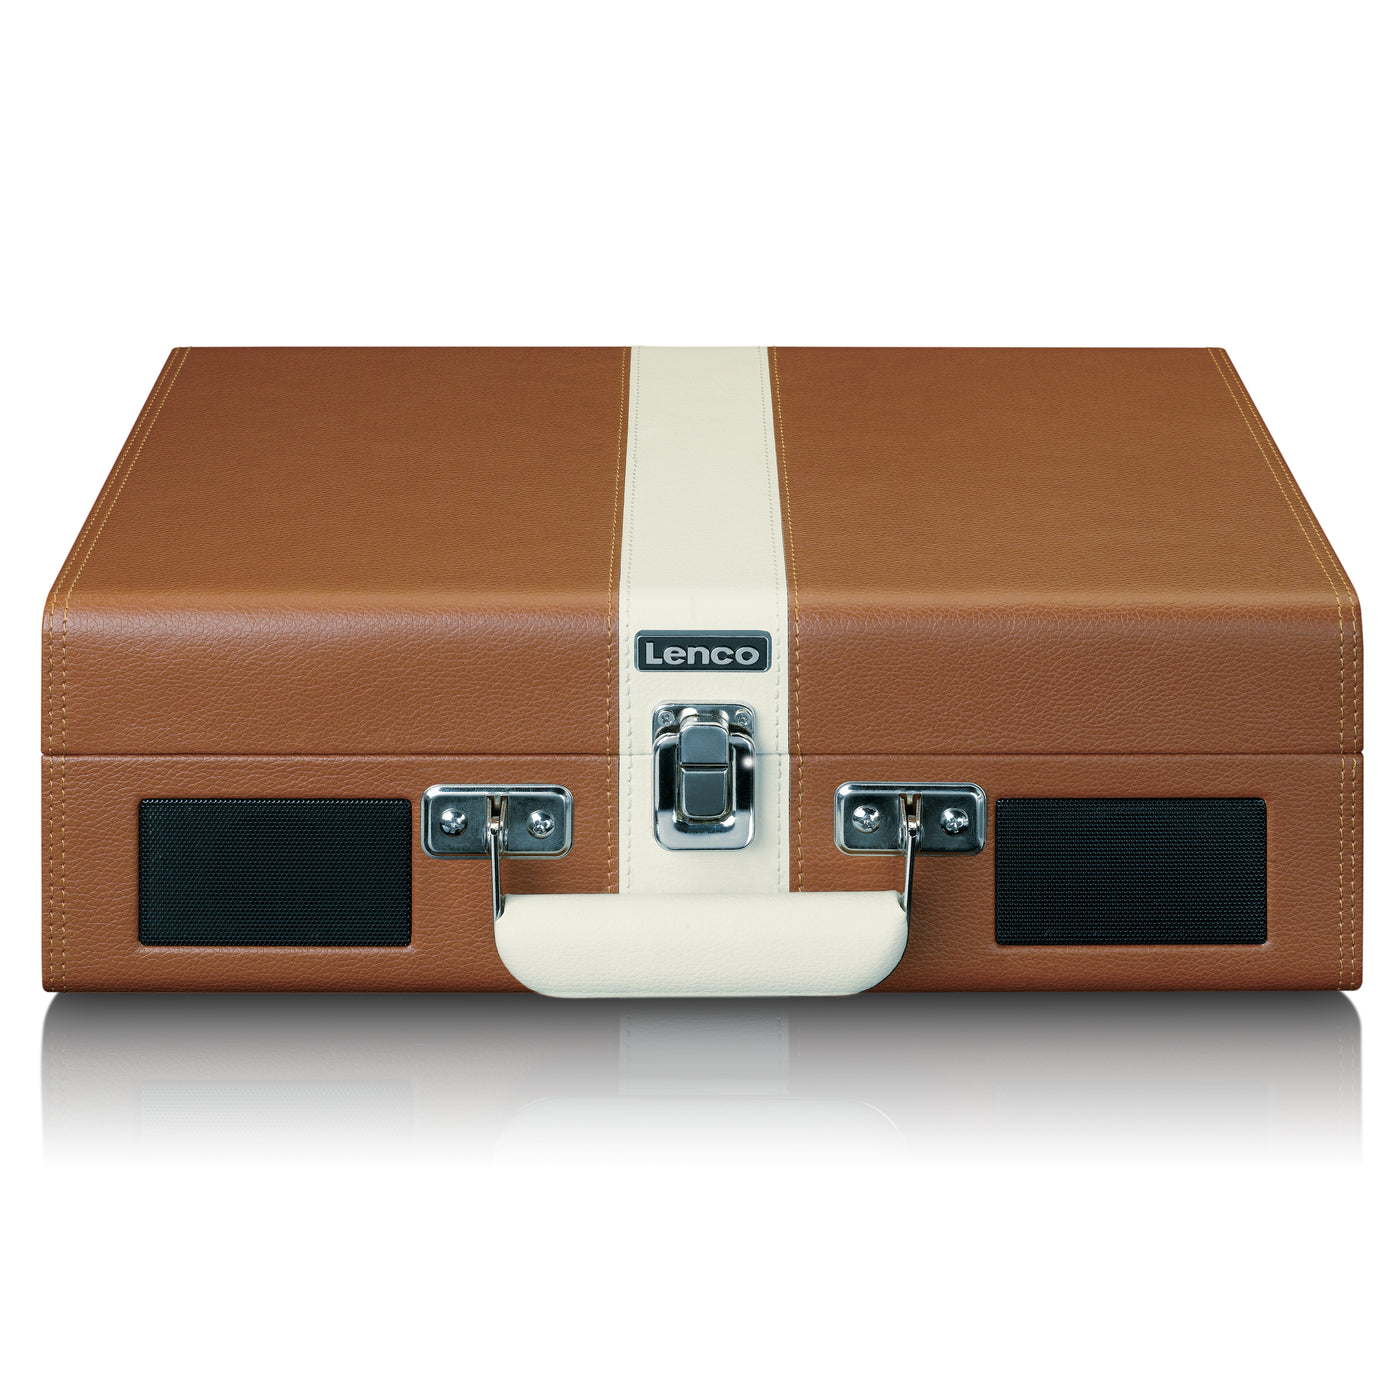 CLASSIC PHONO TT-120BNWH -  Record Player with Bluetooth® reception and built-in speakers and rechargeable battery - Brown/White